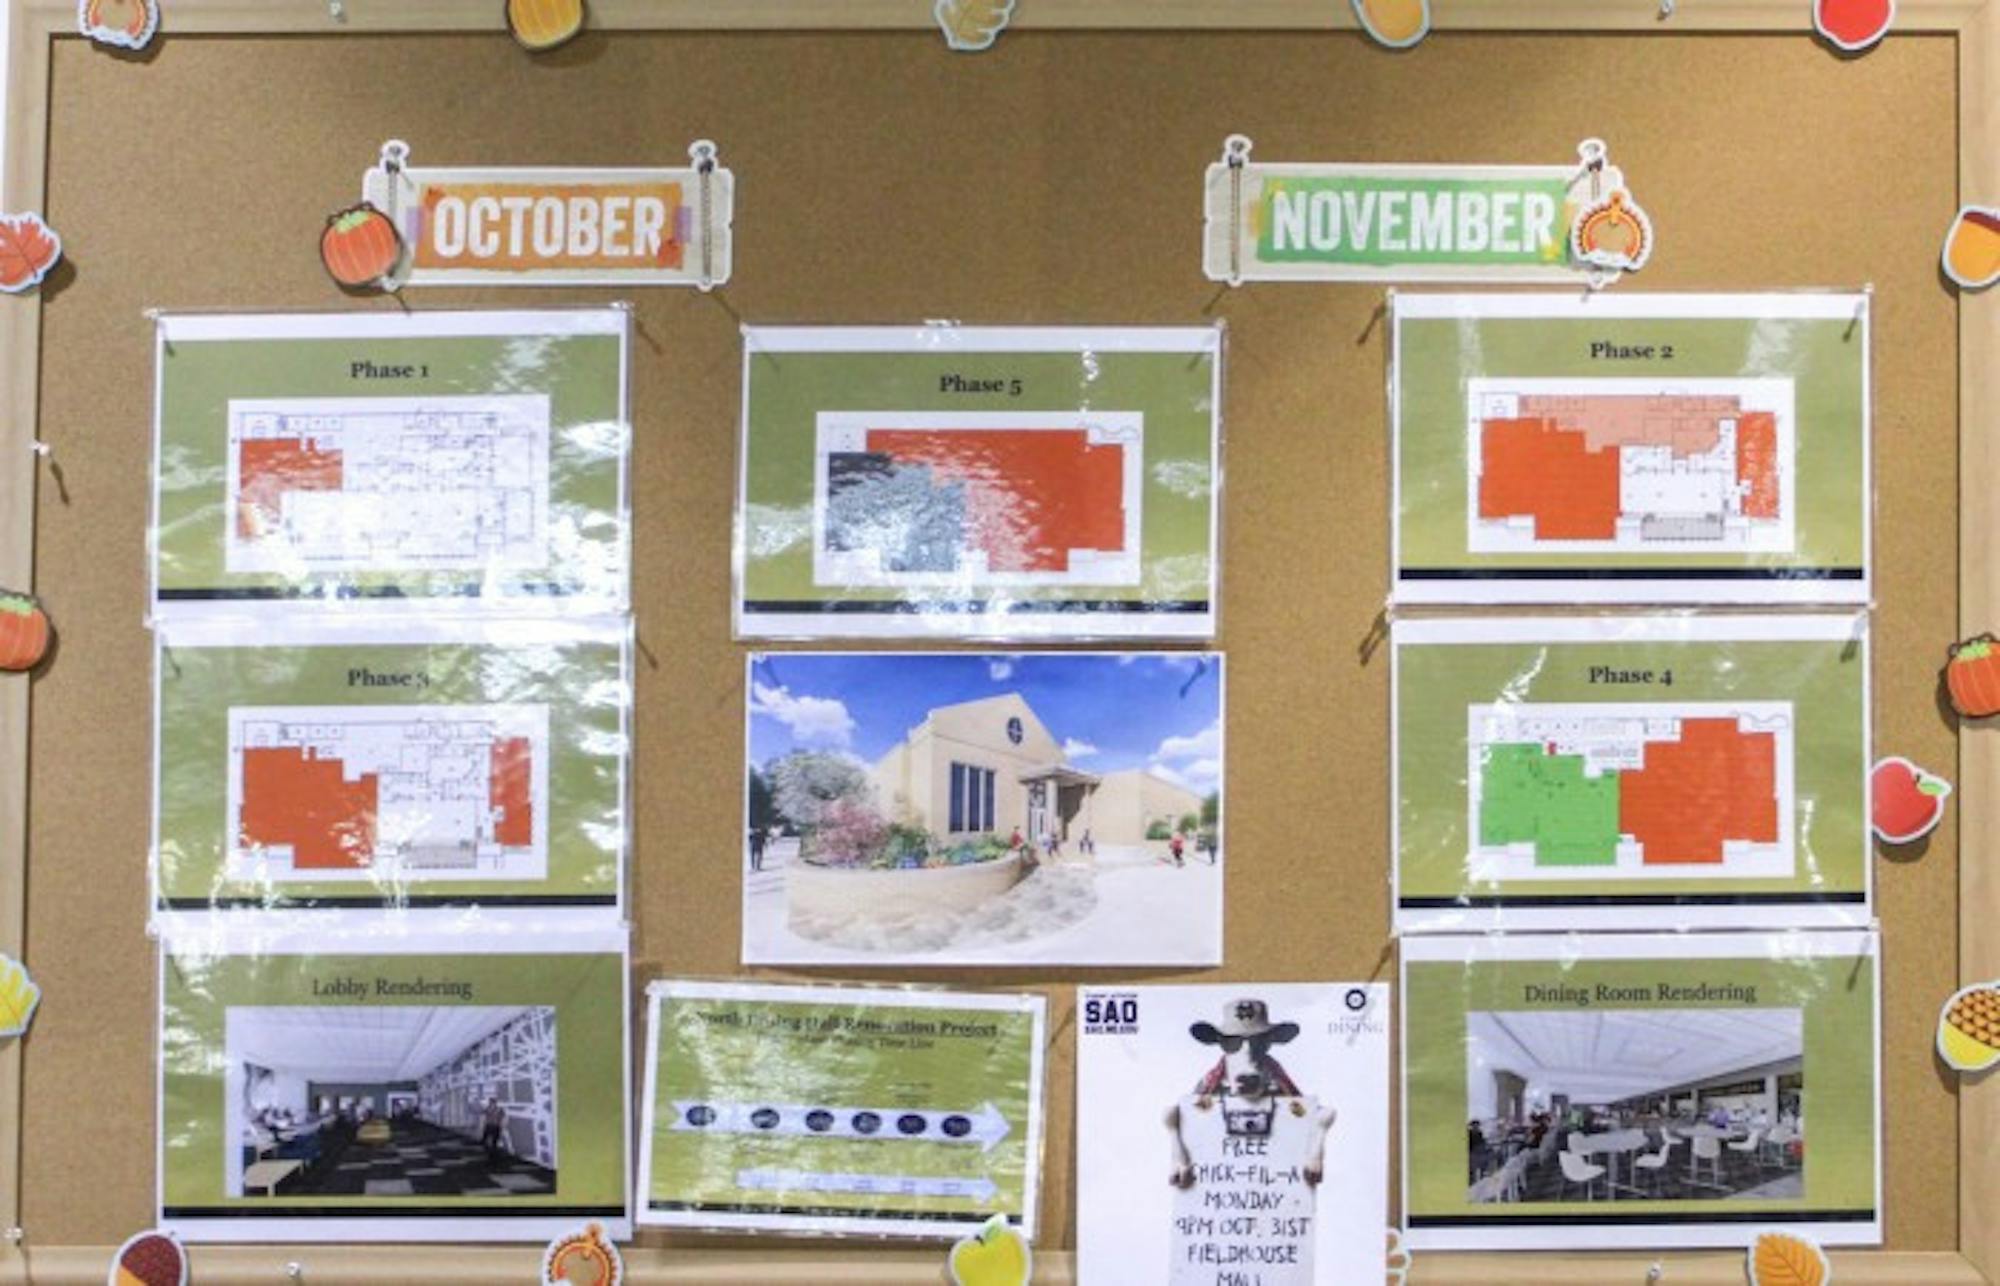 A notice board in North Dining Hall displays renovation plans for the building. Due to the renovations closing off large portions of the building, students will receive $250 of additional Flex Points next semester.